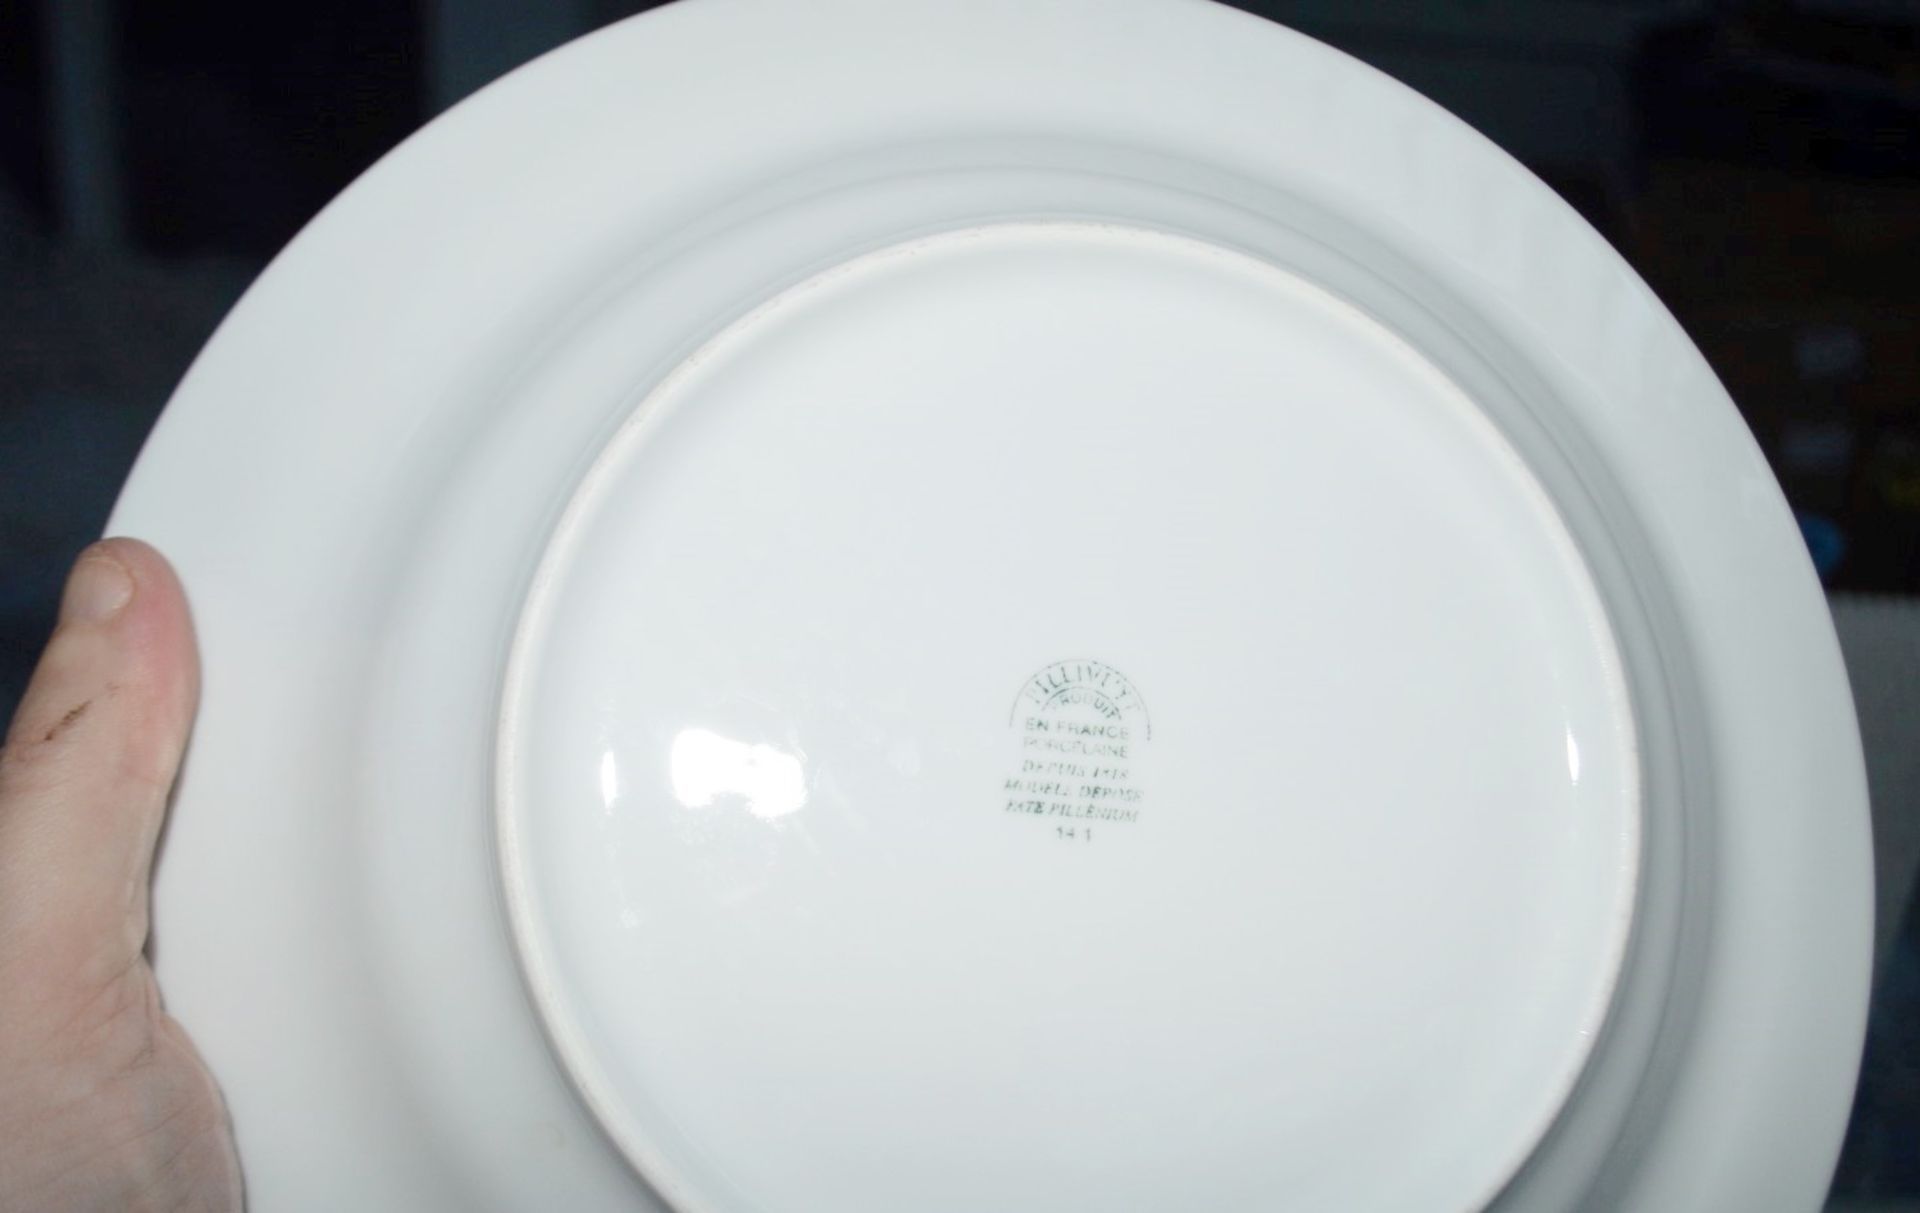 12 x PILLIVUYT 27cm Porcelain Pasta / Soup Plates In White Featuring 'Famous Branding' In Gold - Image 3 of 5